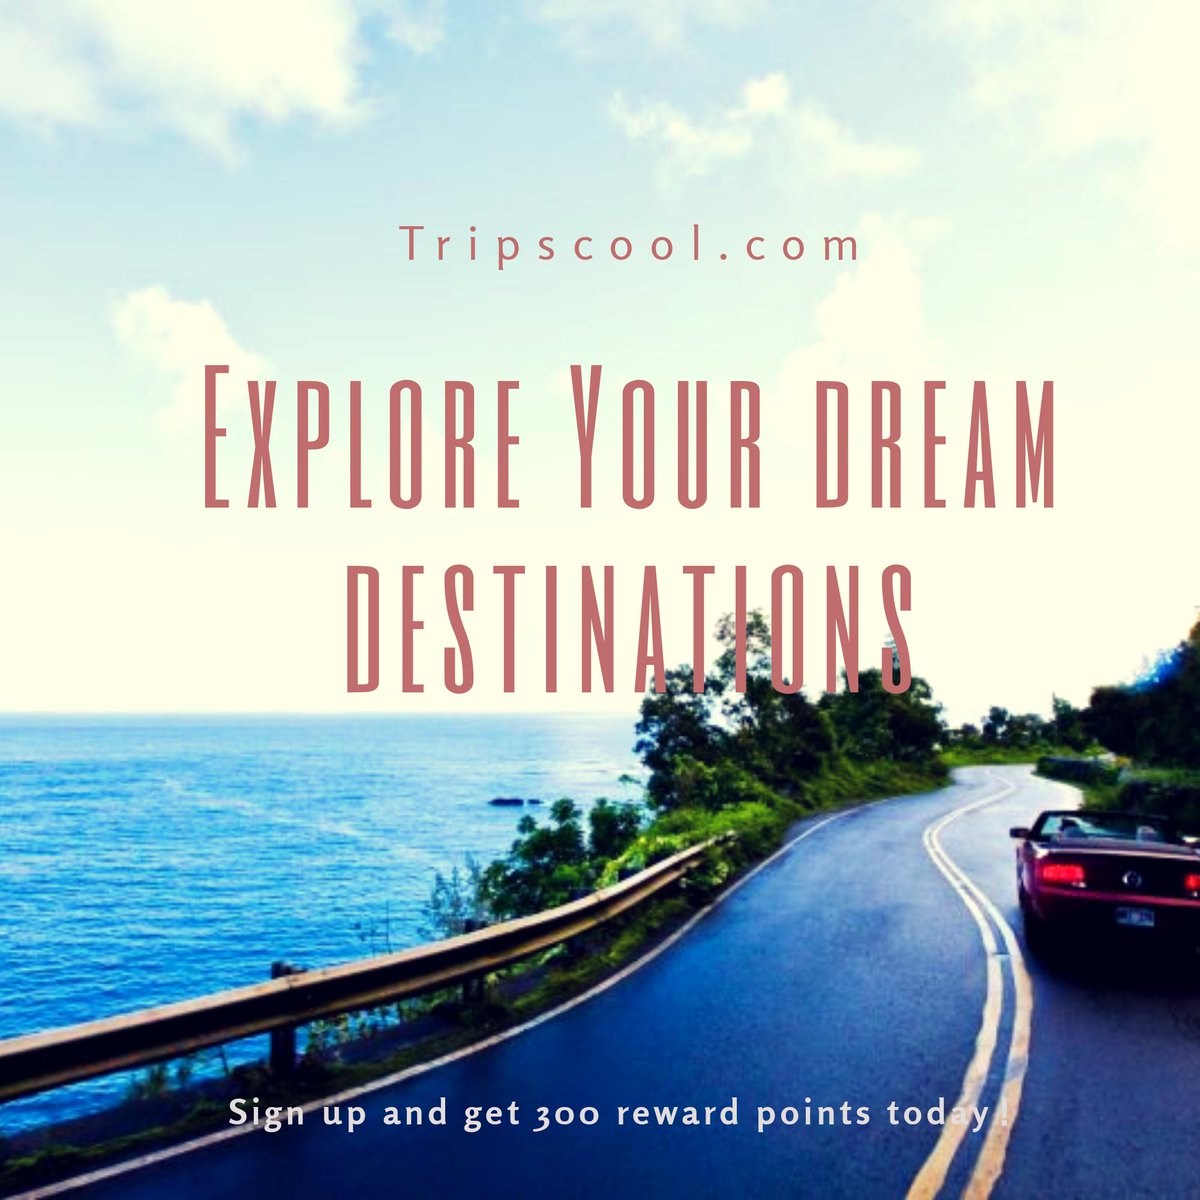 The World is Yours To Explore, sign up at tripscool.com. Get your exclusive bonus today! tripscool.com/login/register✈️🏖🌉🏜
#tripscool #travel #traveling #holiday #vacation #travelling #usatrip #adventures #hiker #traveller #travel #travelphotography # #neverstopexploring